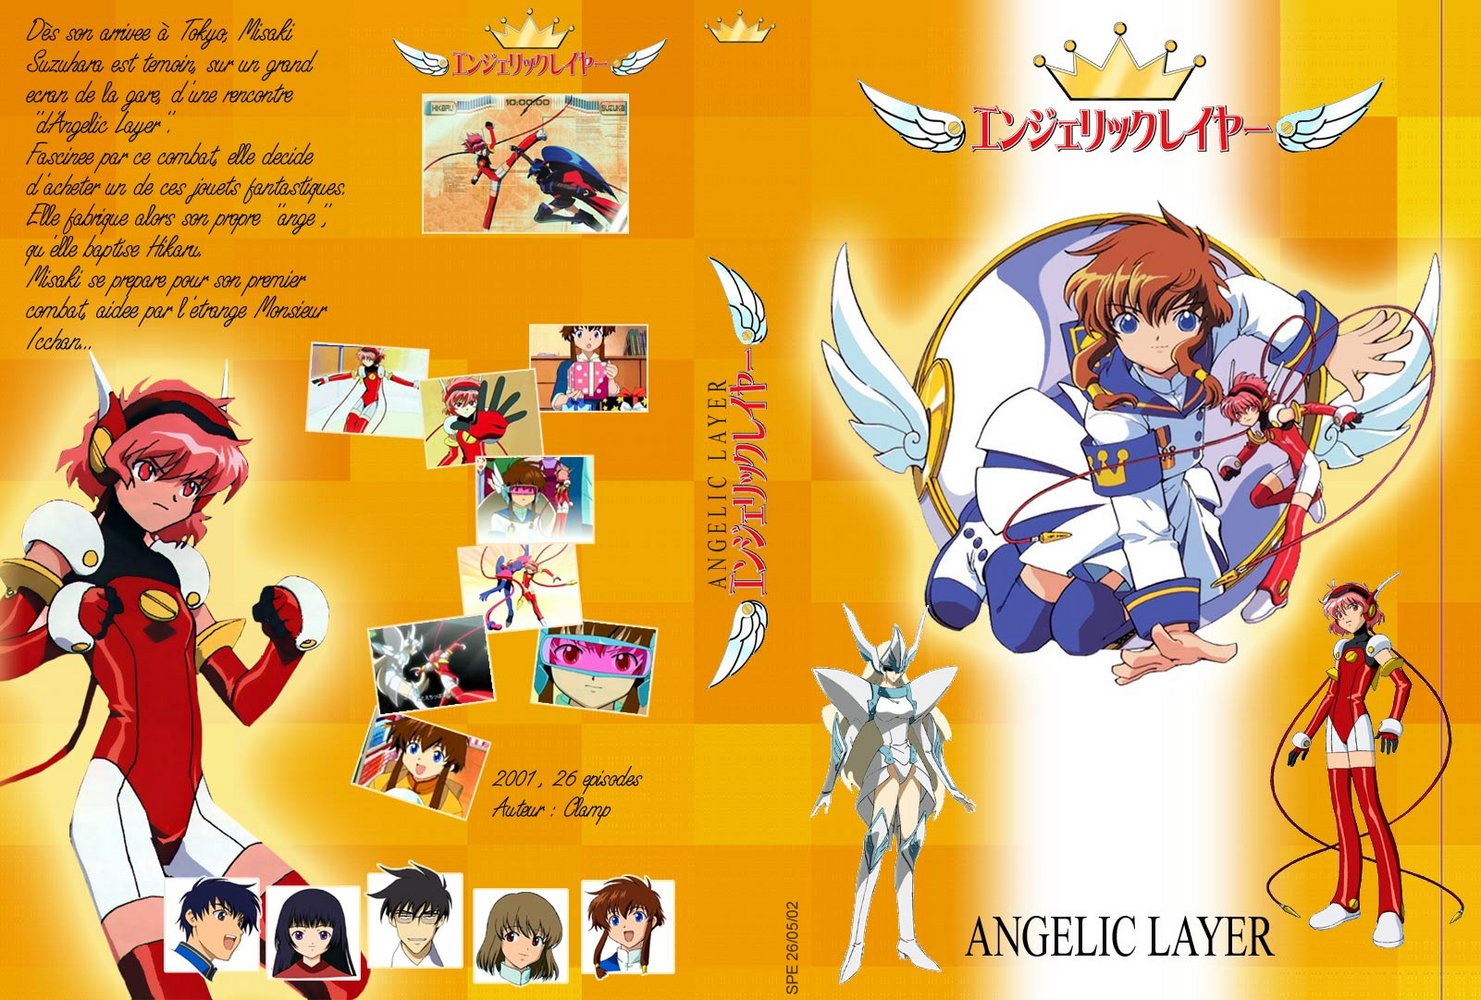 Jaquette DVD Angelic Layer